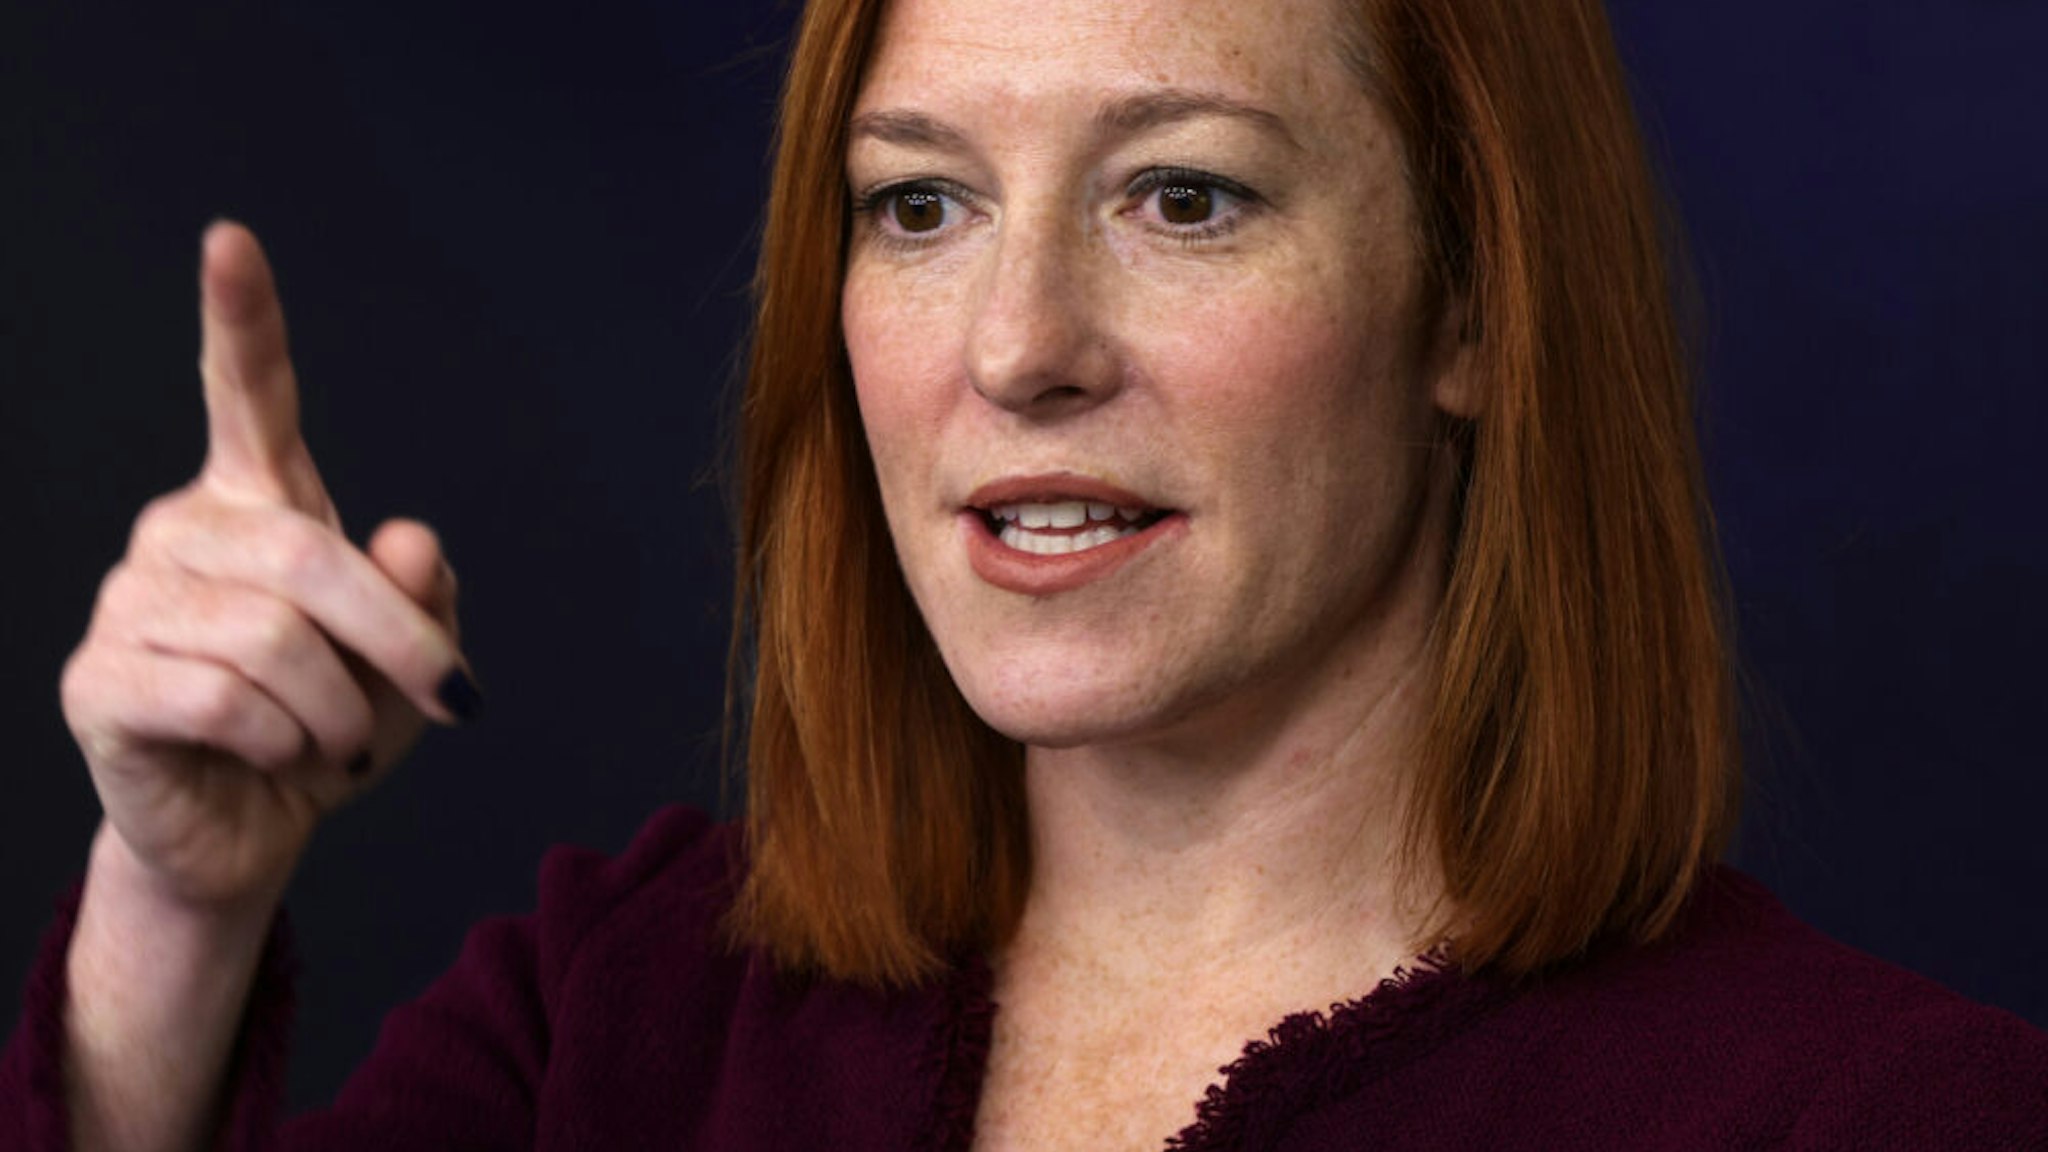 WASHINGTON, DC - FEBRUARY 09: White House Press Secretary Jen Psaki speaks during a news briefing at the James Brady Press Briefing Room of the White House February 9, 2021 in Washington, DC. Psaki held a news briefing to answers questions from the members of the press.